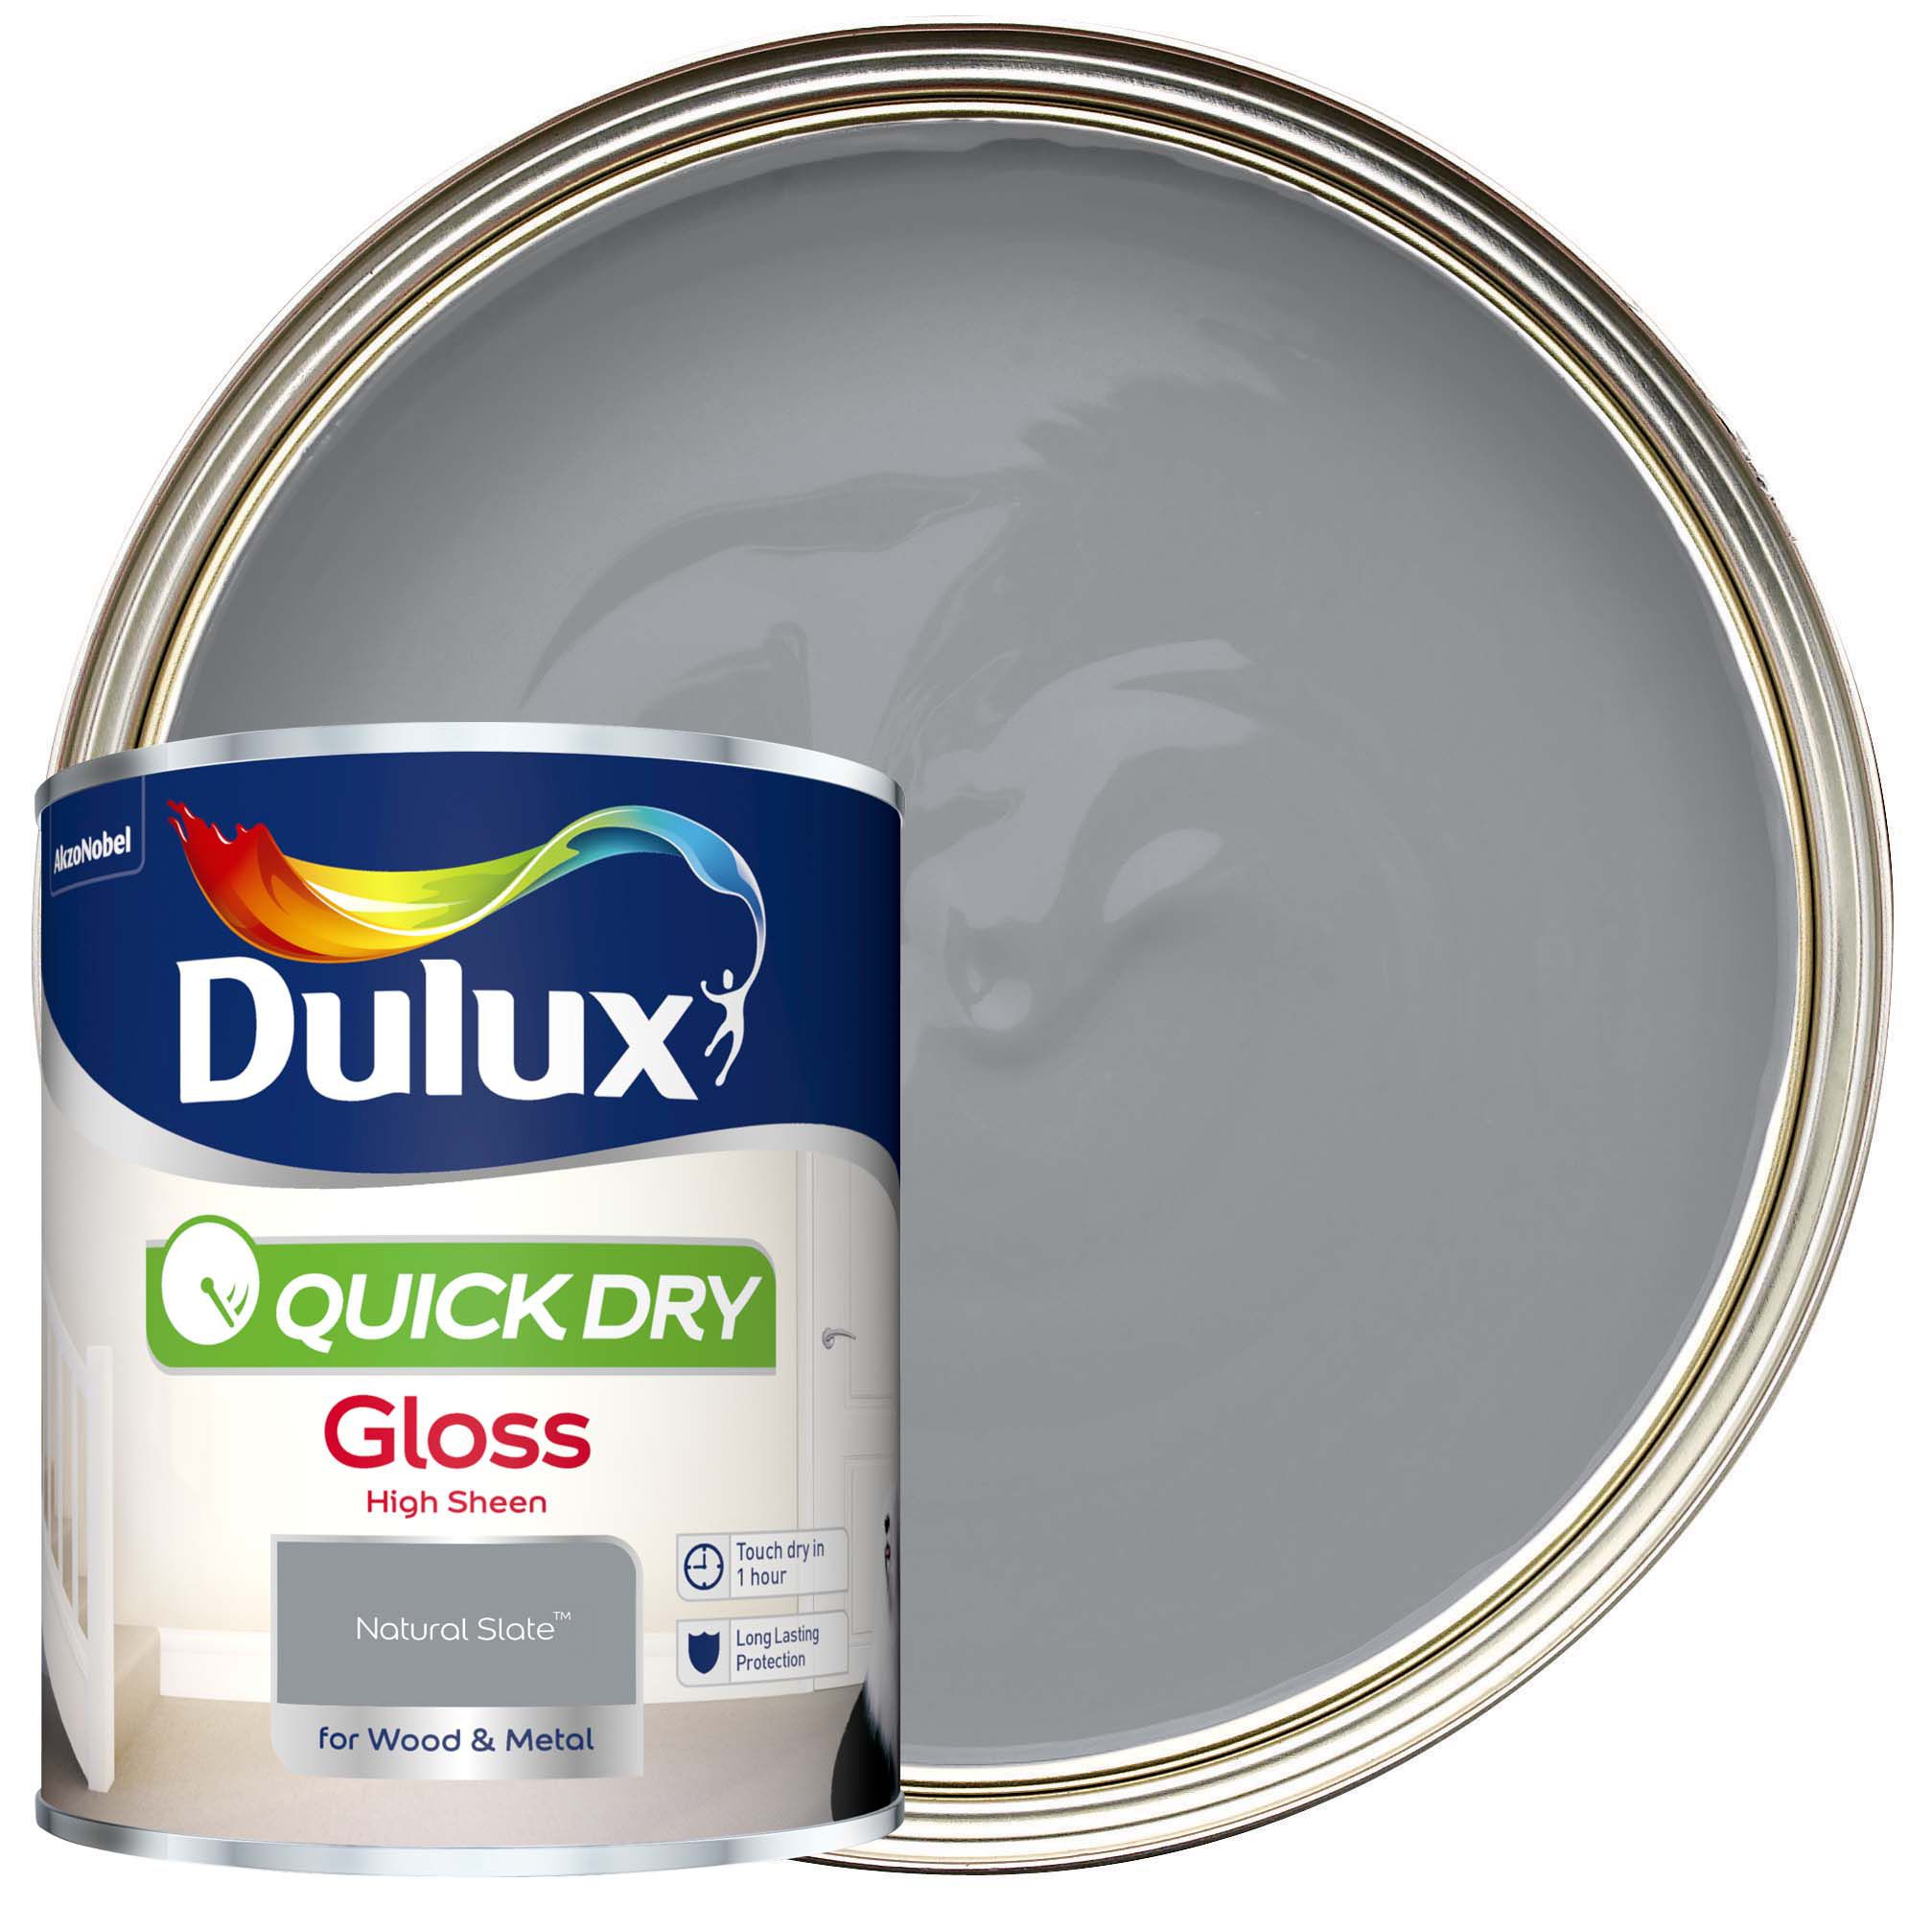 Dulux Quick Dry Gloss Paint - Natural Slate - 750ml